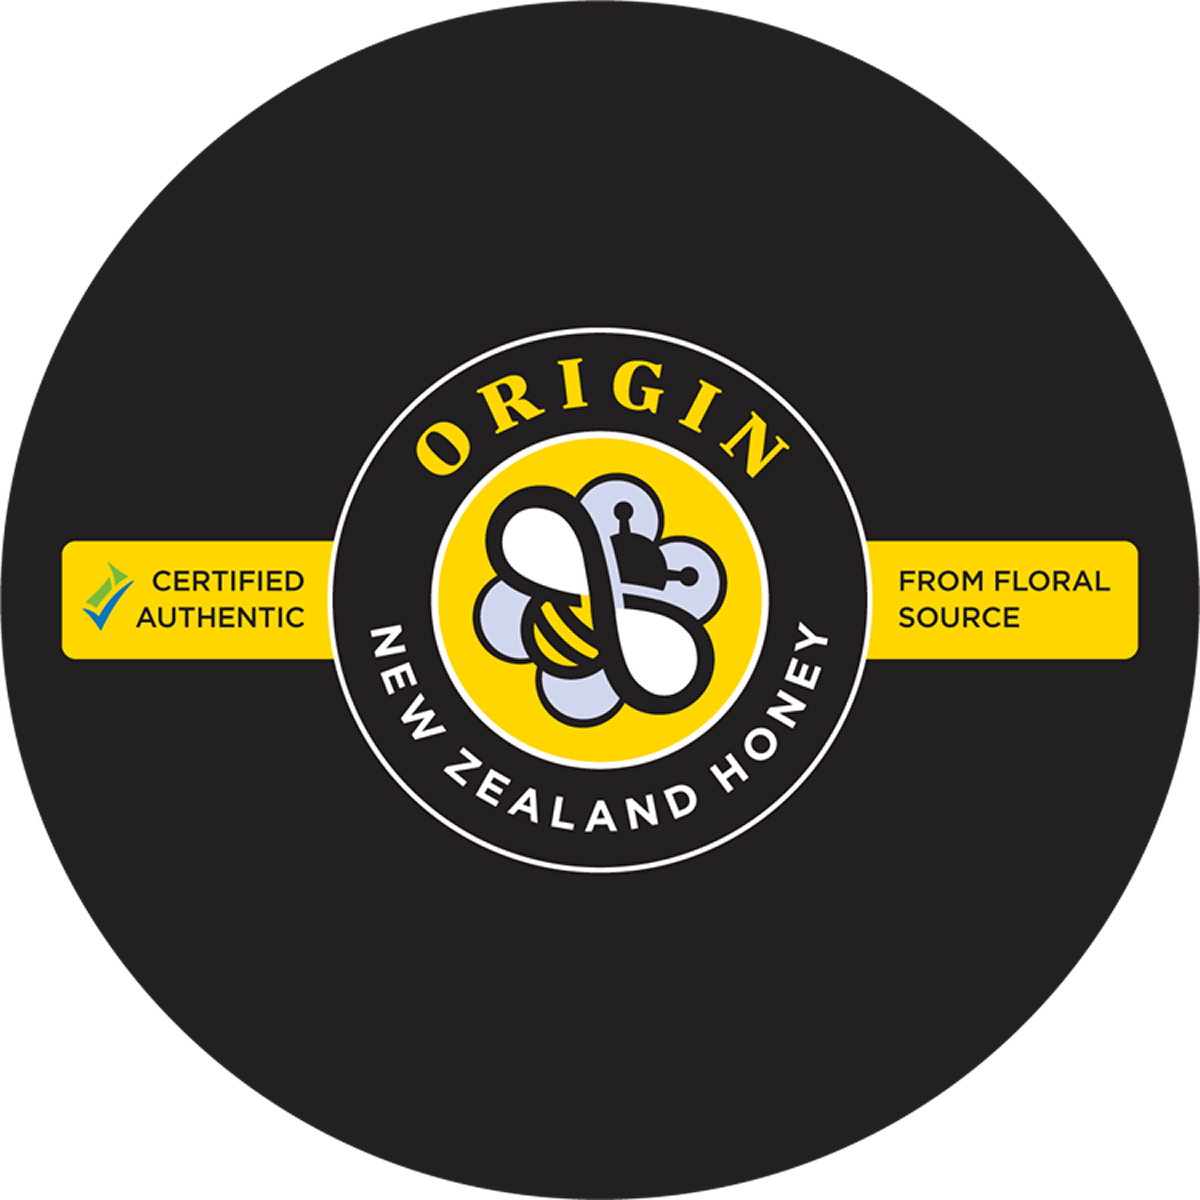 Example Honey Jar Lid - Certified Authentic New Zealand Honey from local floral sources